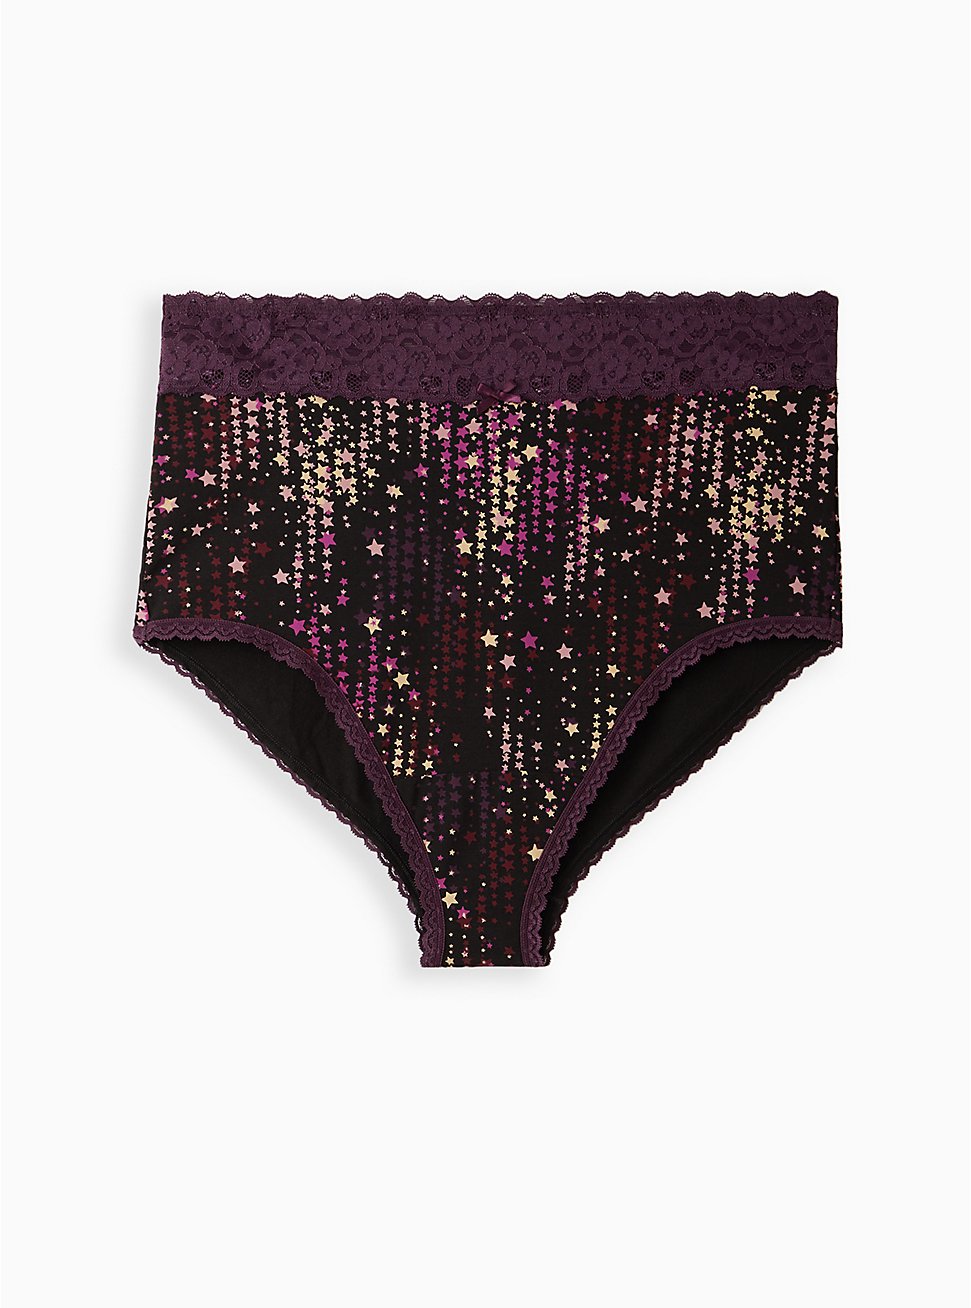 High-Rise Cheeky Panty - Cotton Stars Purple, STAR LAYERS, hi-res